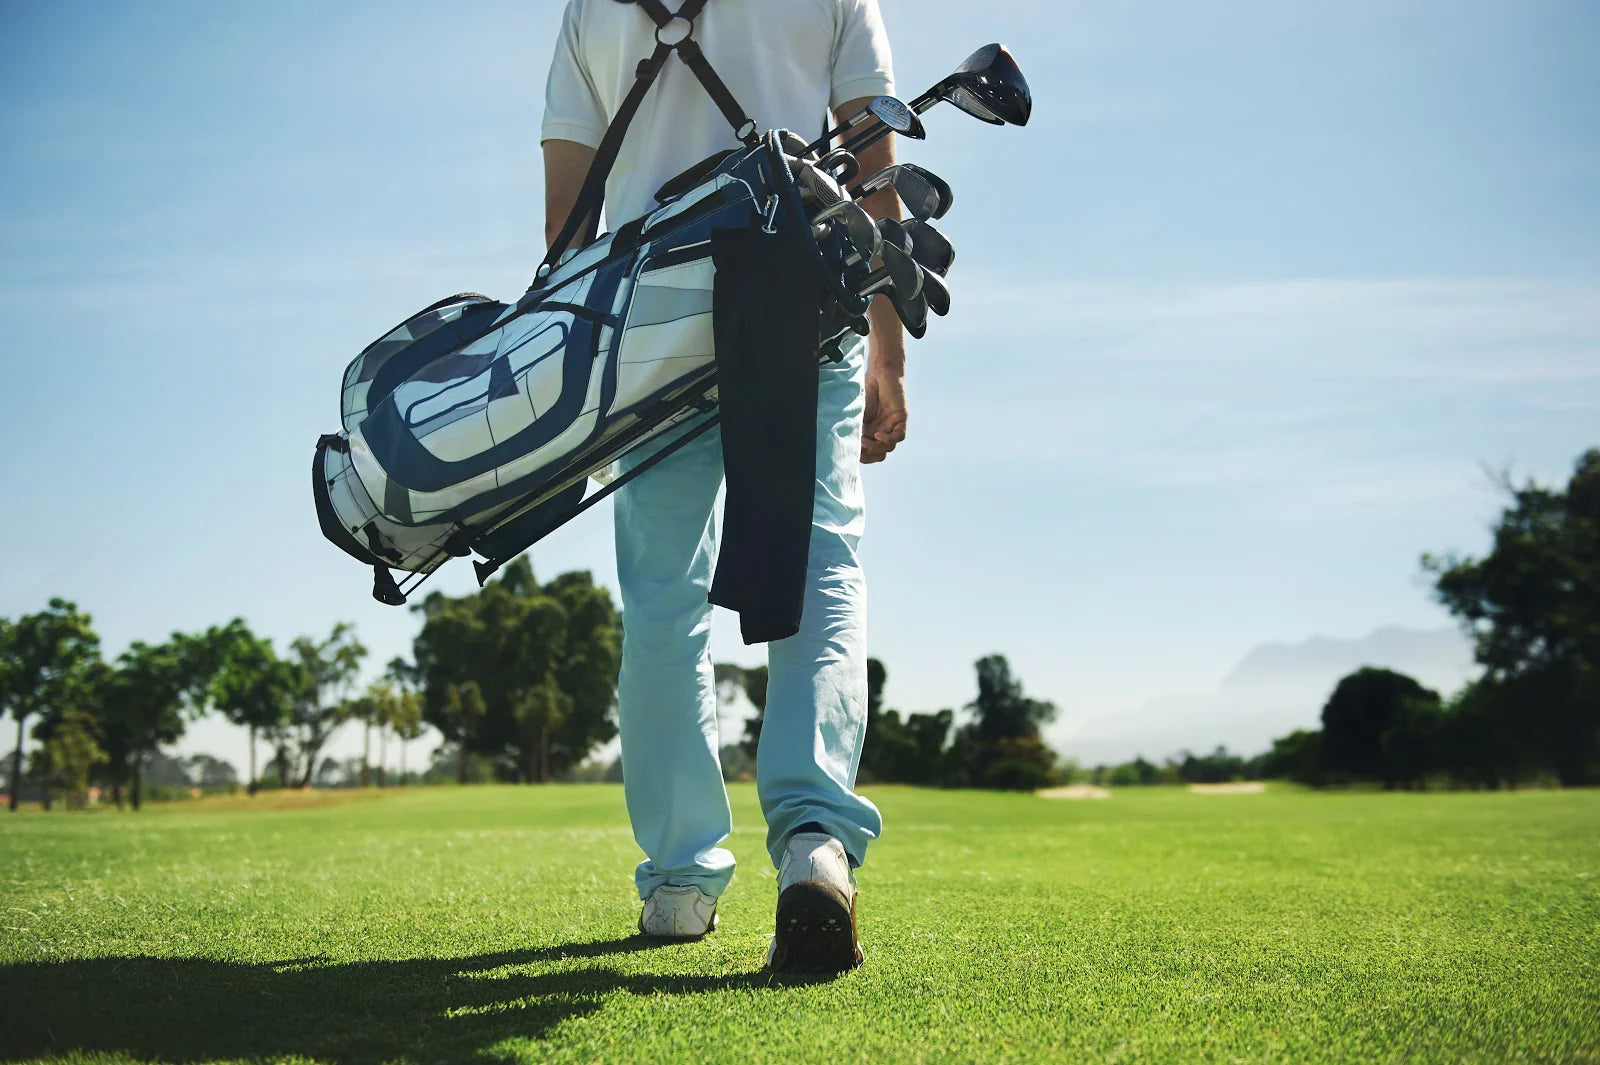 write a blog about The Top 10 Golf Bags of the Year